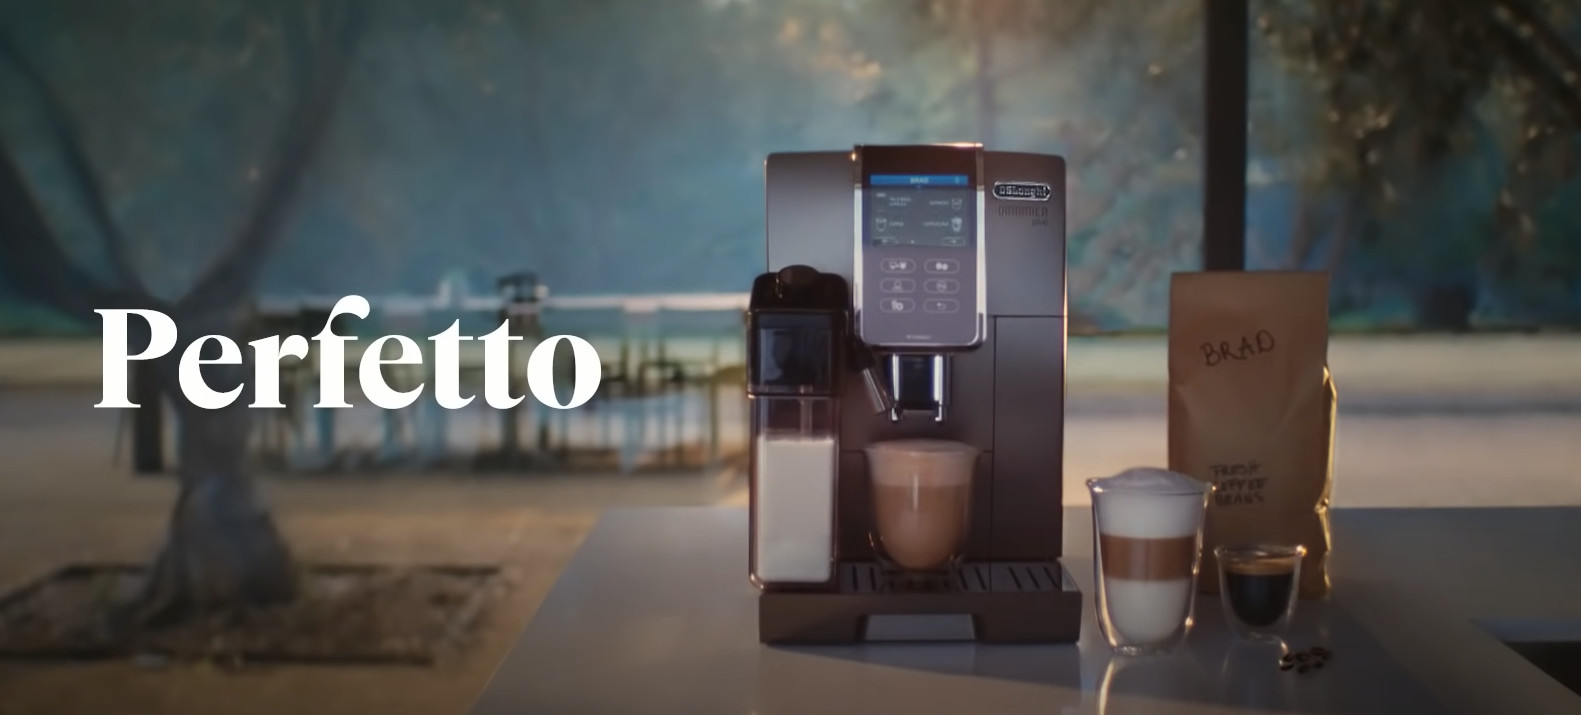 Perfetto from bean to cup - Brad Pitt x De’Longhi Global Campaign